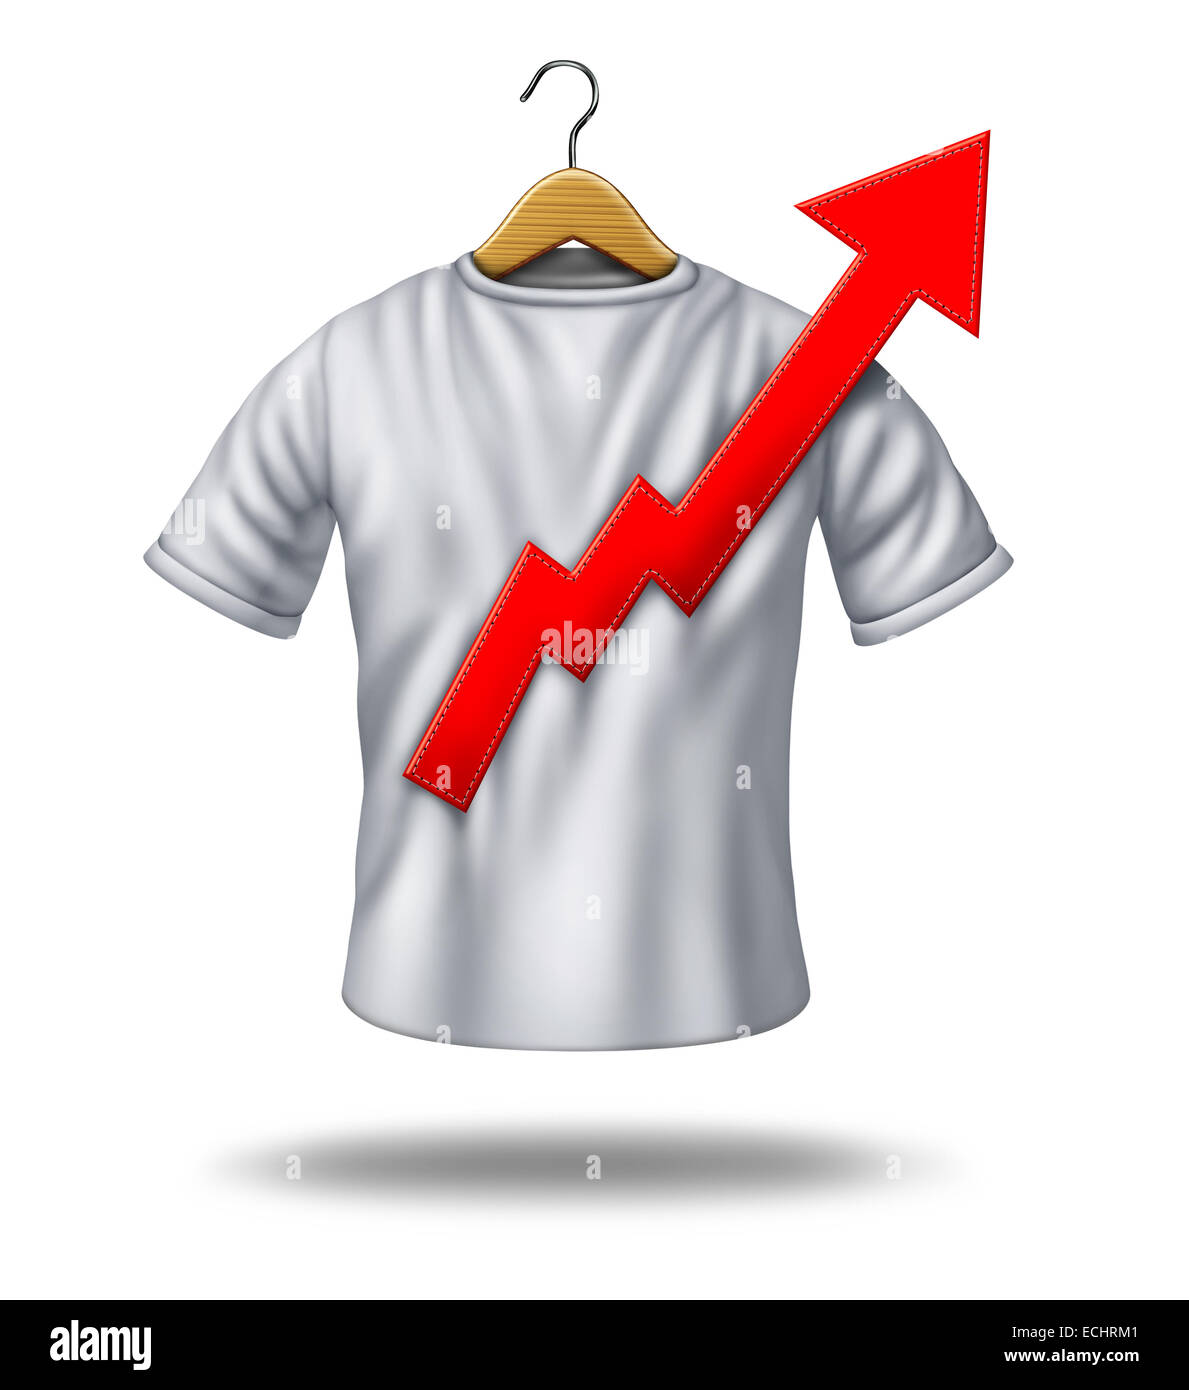 Retail garment and clothing industry increase concept with a white shirt and a sewen patch as an upward red financial chart arrow as a symbol of fashion and textile manufacturing. Stock Photo